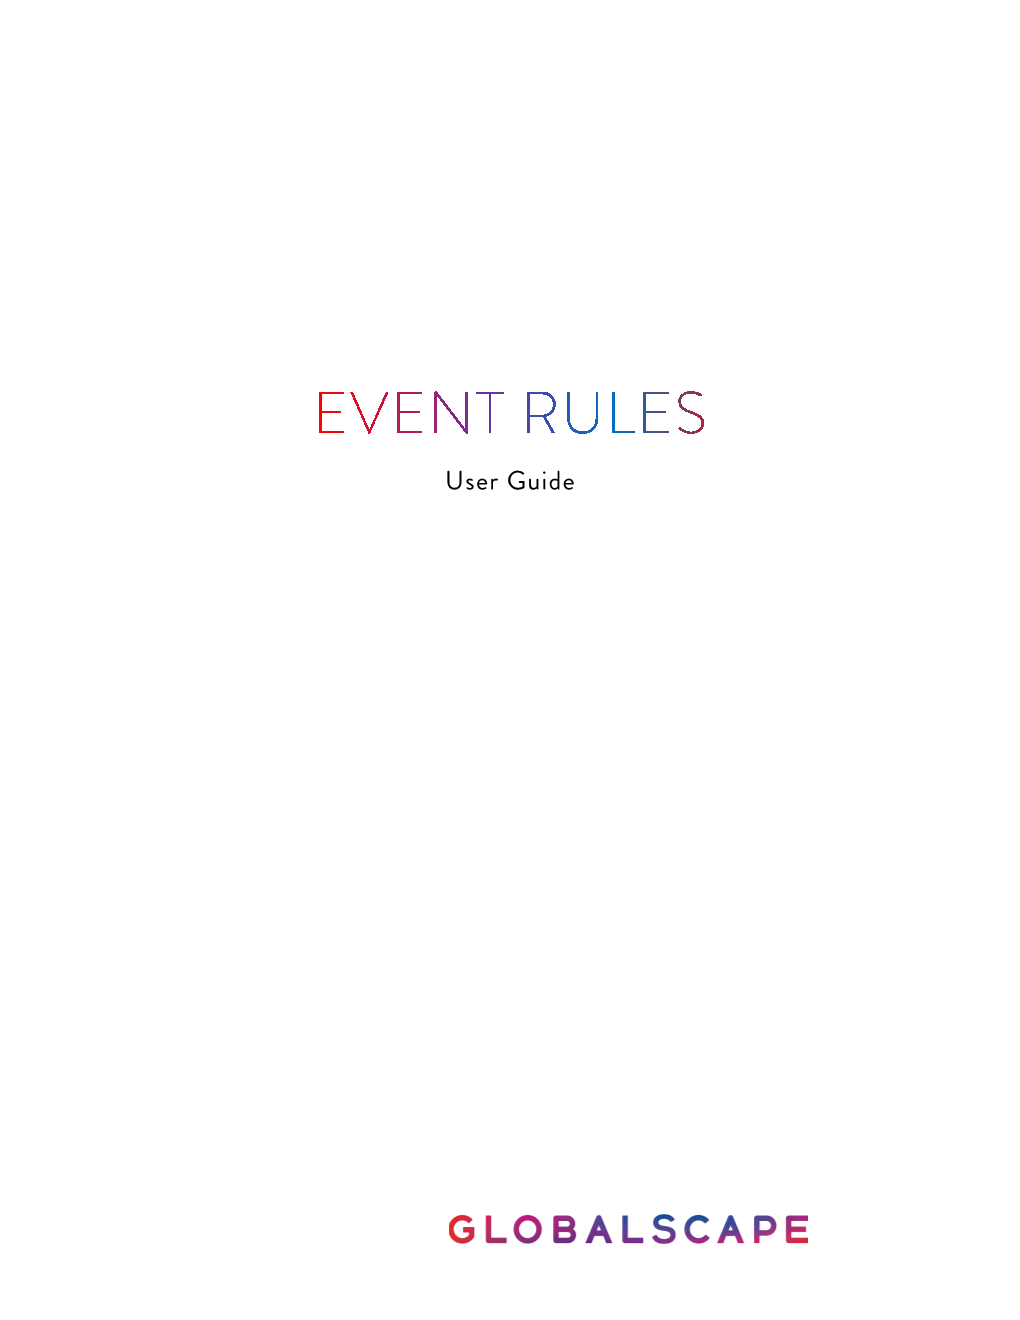 EFT™ Event Rules User Guide